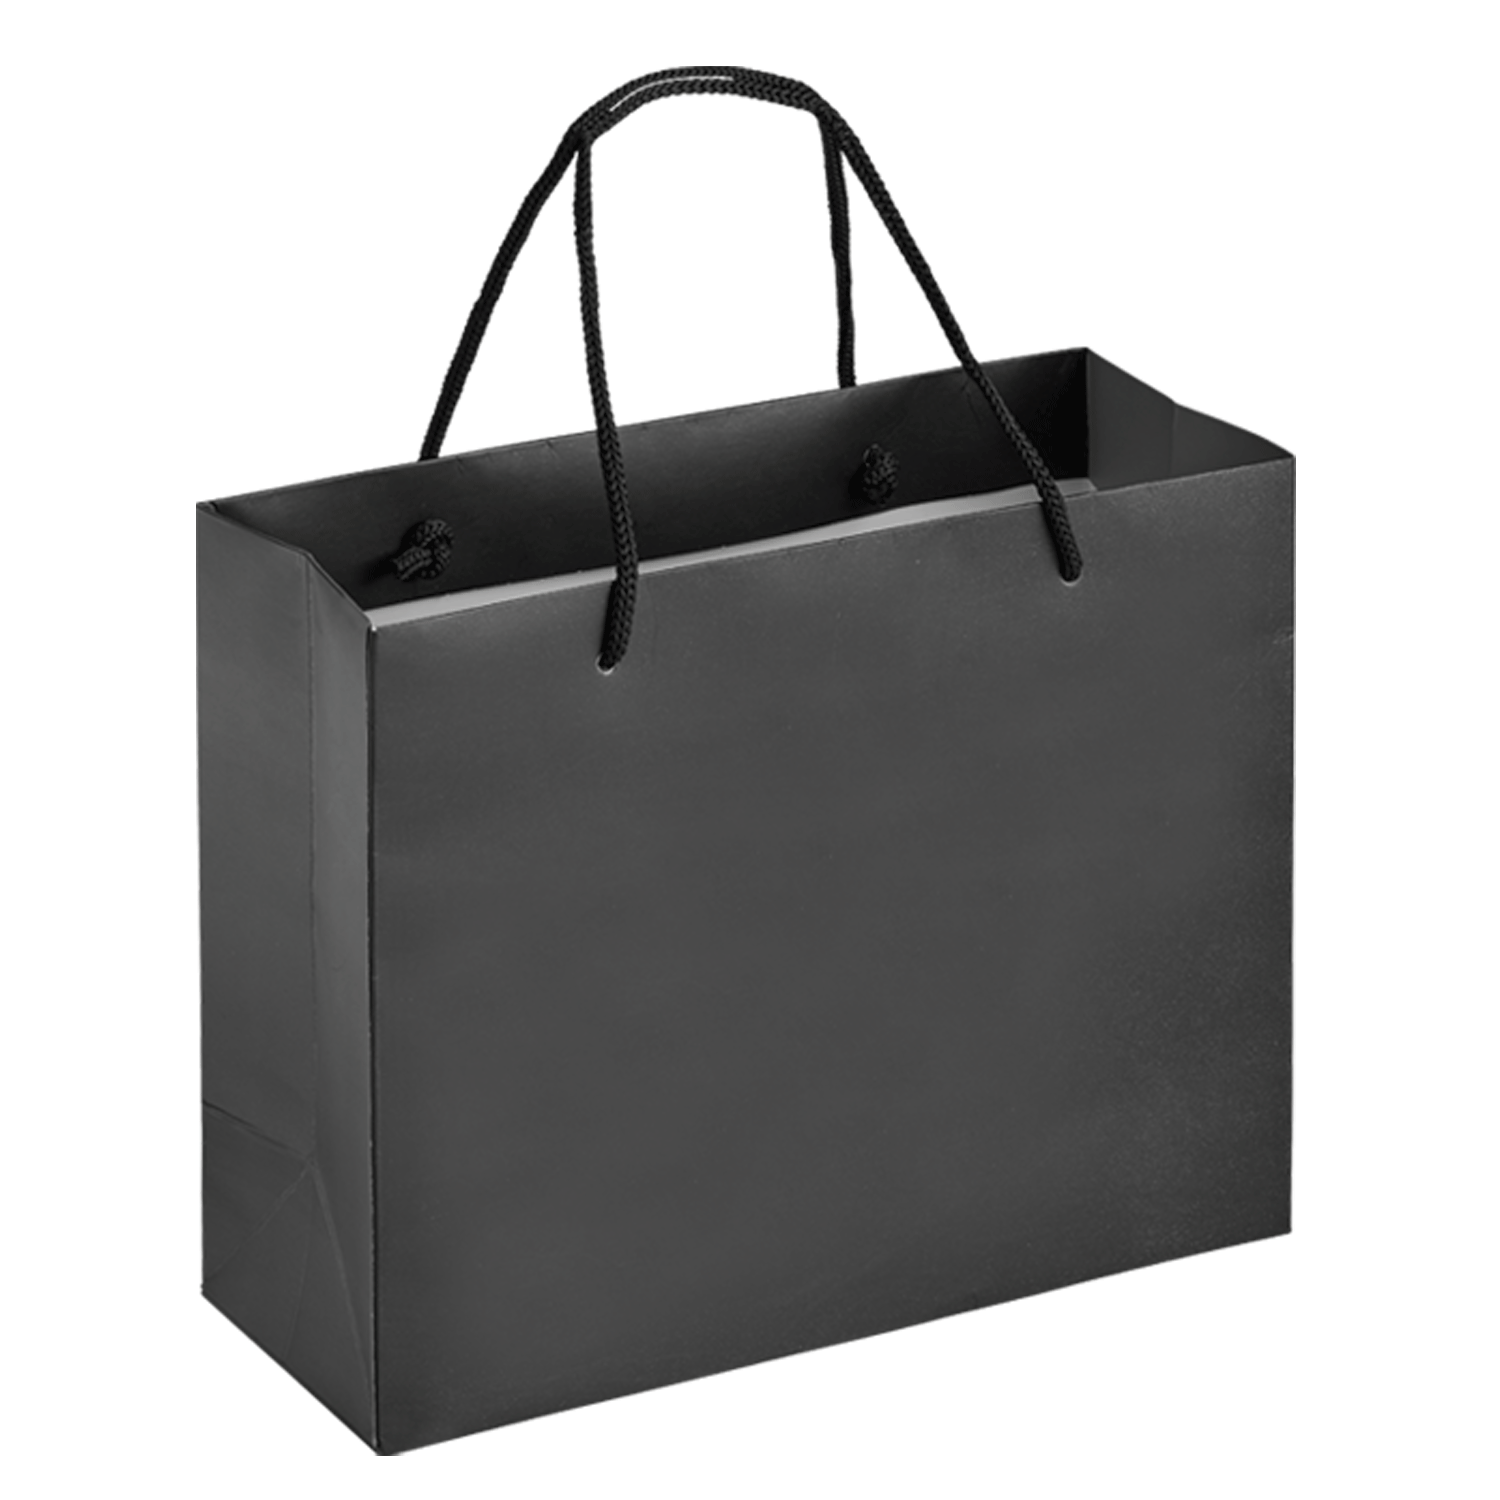 Boutique Shopping Bags Black - Laminated (Large) [Min. Order Qty: 100 Bags]